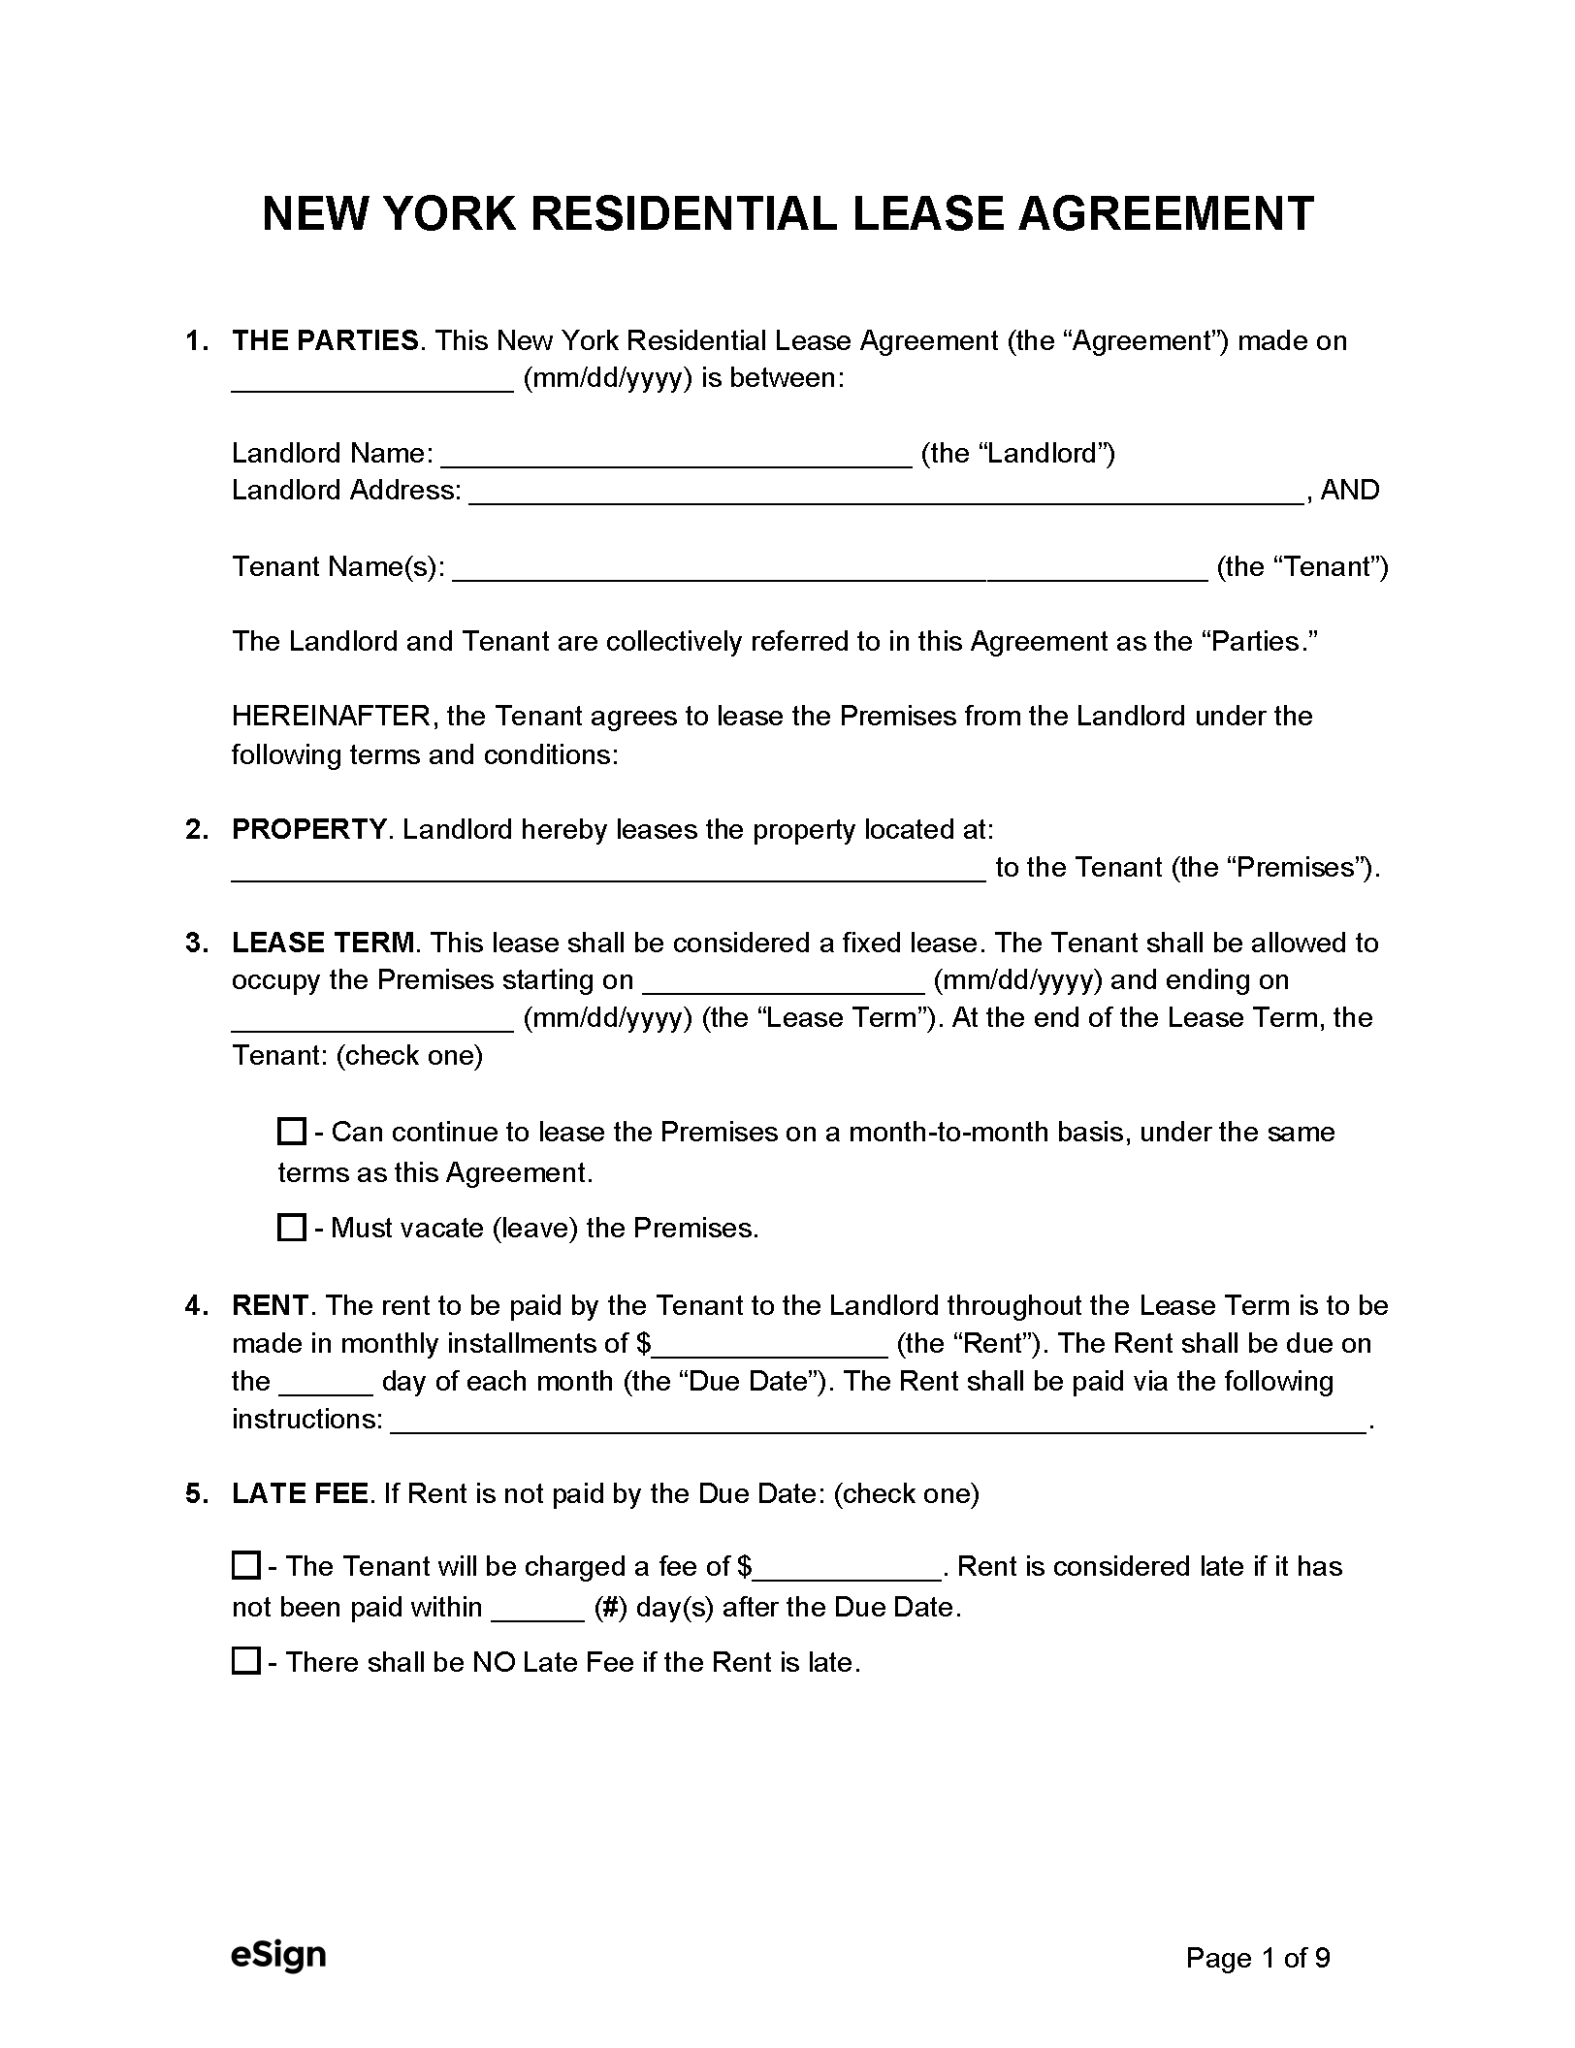 free-new-york-standard-residential-lease-agreement-template-pdf